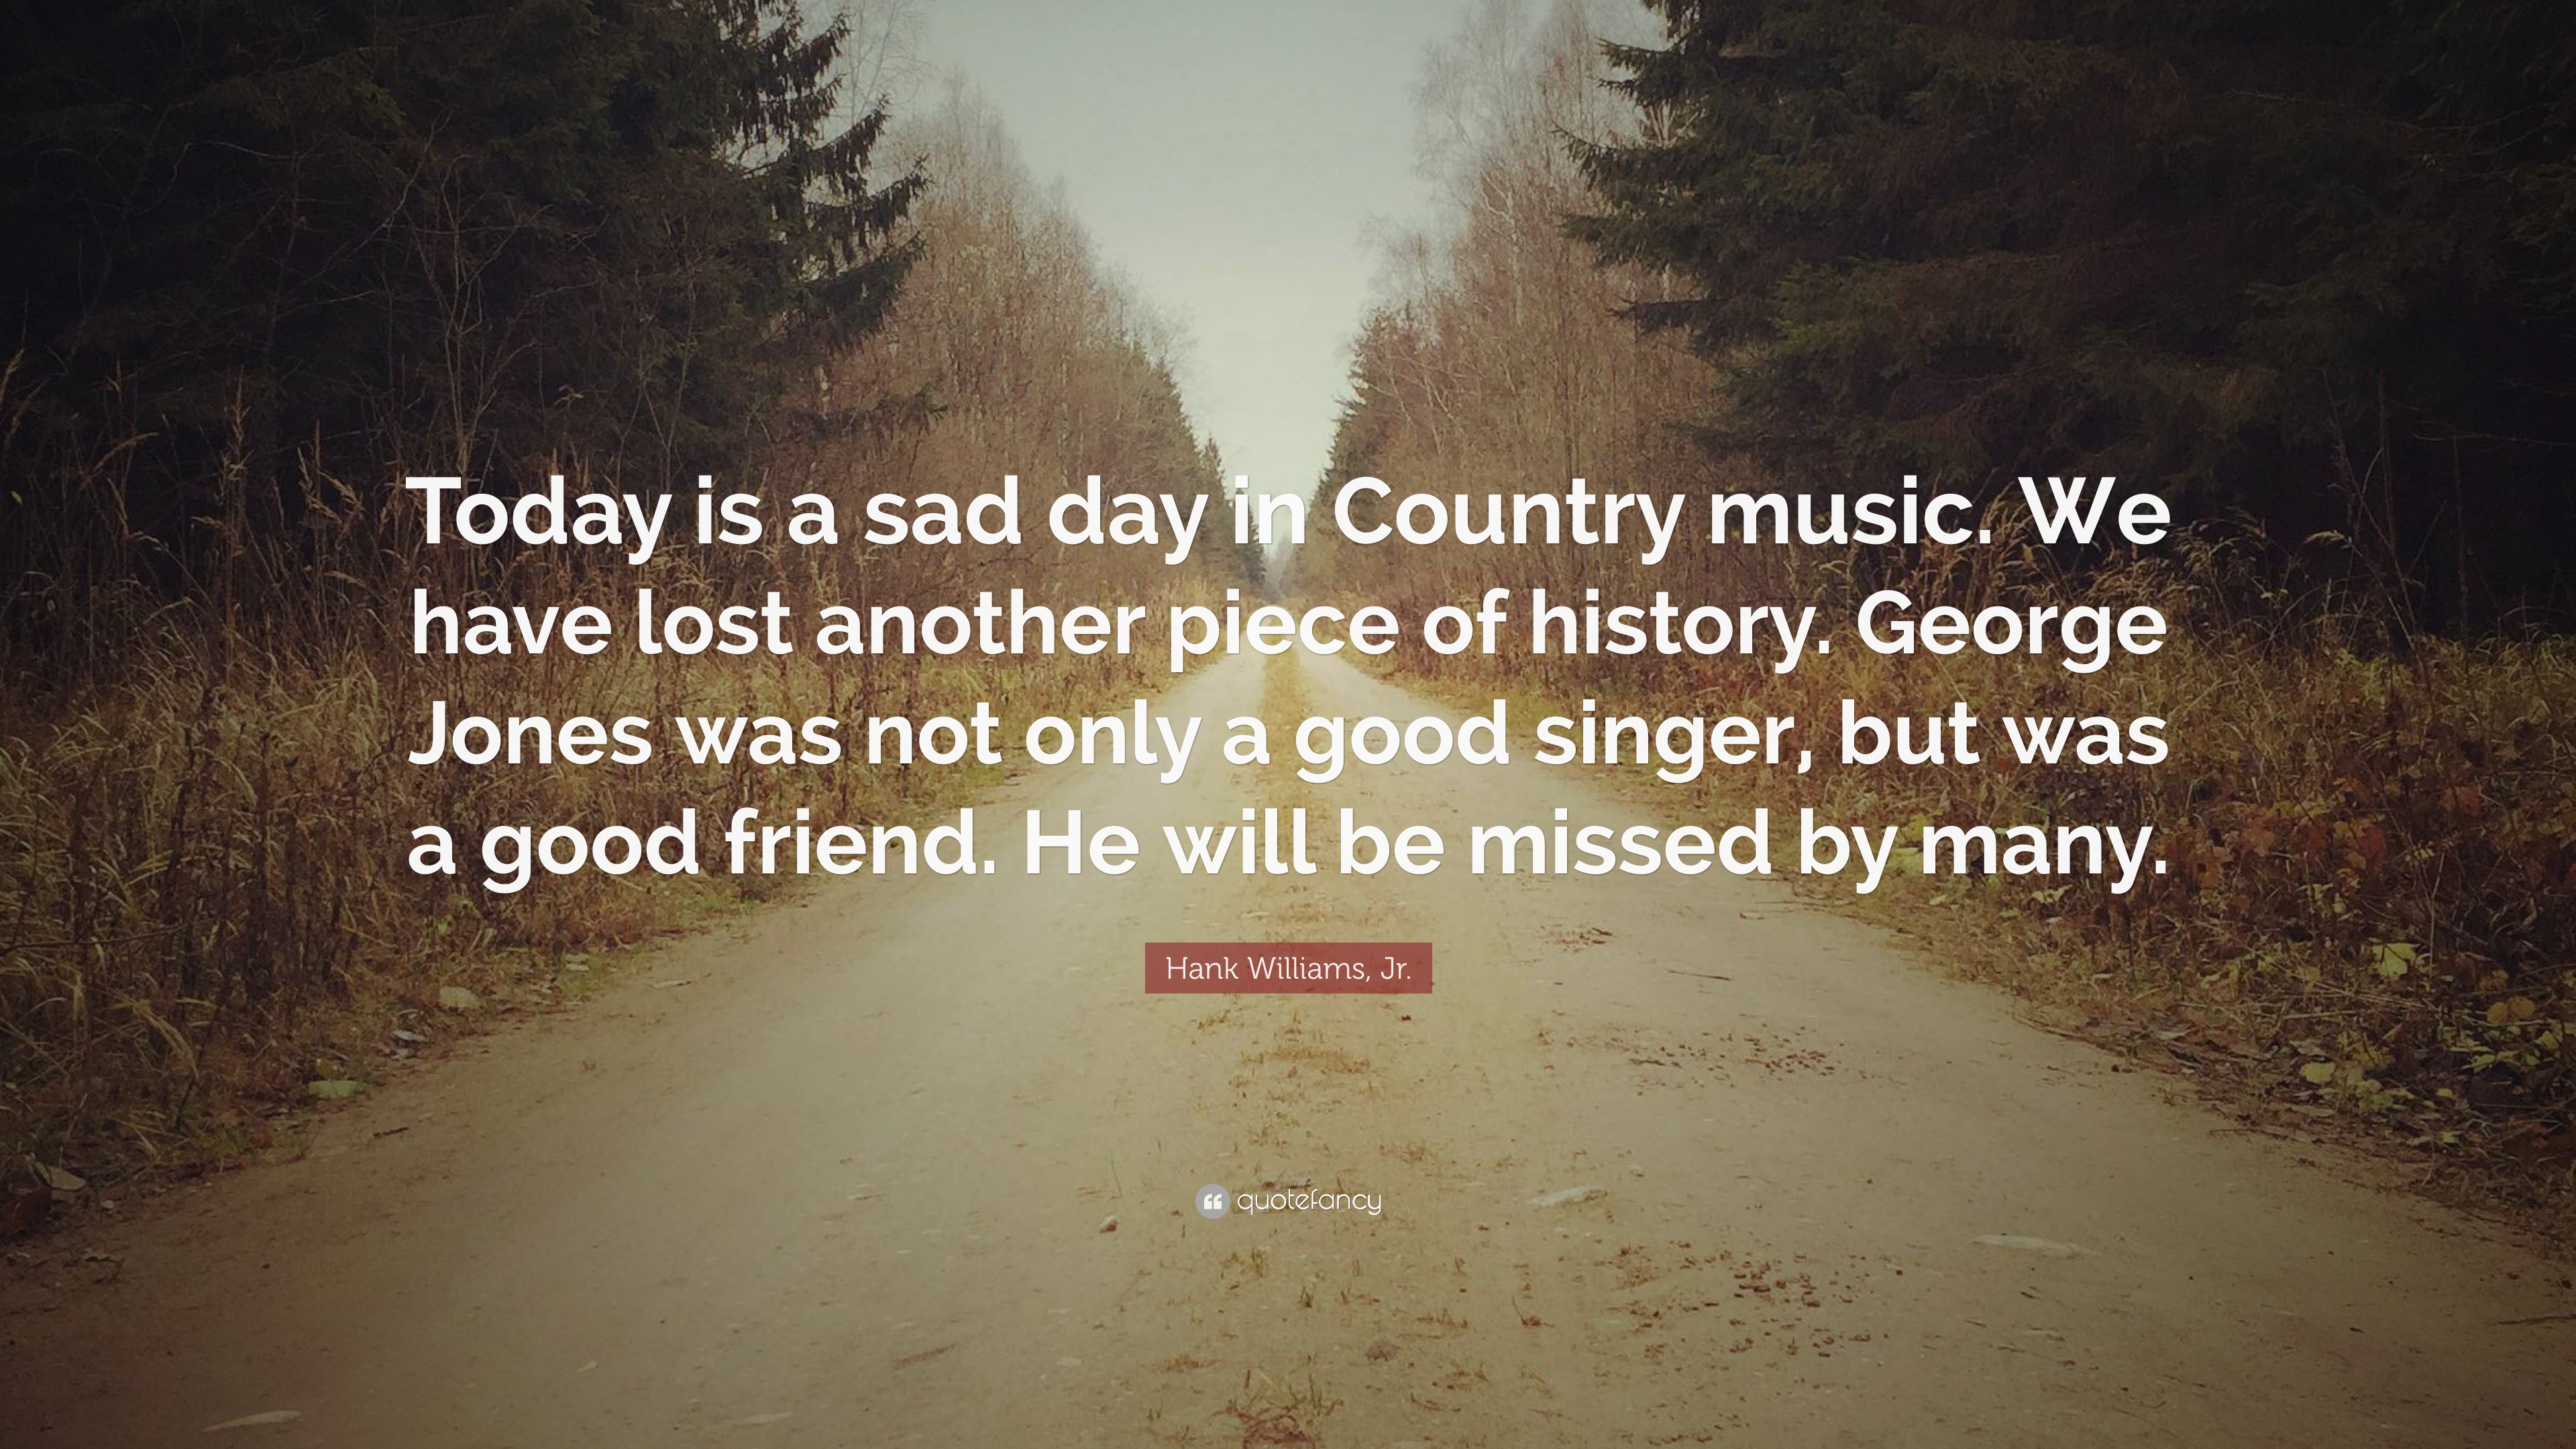 Hank Williams, Jr. Quote: “Today is a sad day in Country music. We have lost another piece of history. George Jones was not only a good singer, but.”